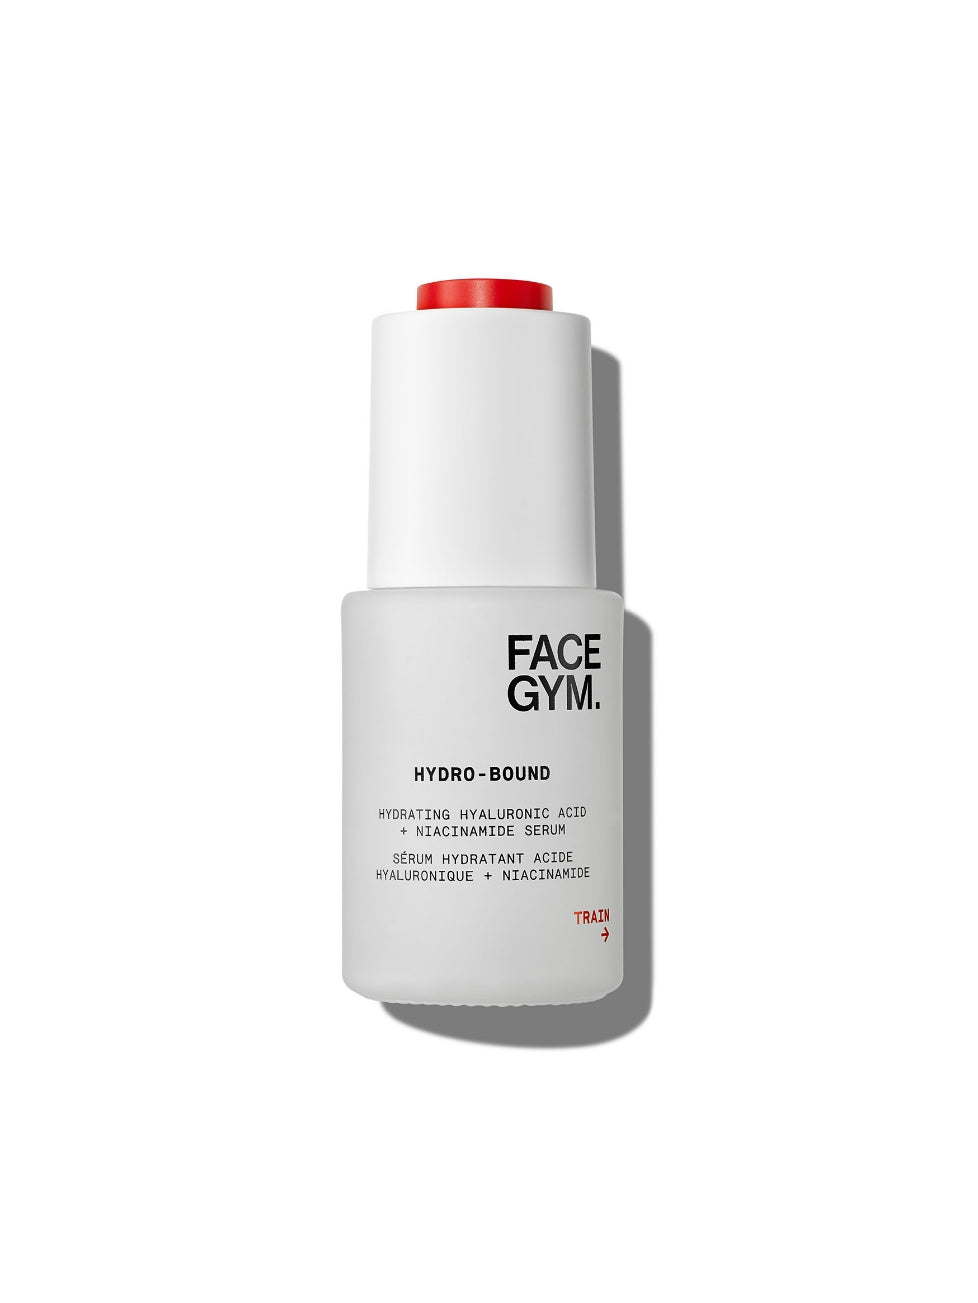 FaceGym Hydro-bound Hydrating Hyaluronic Acid & Niacinamide Serum